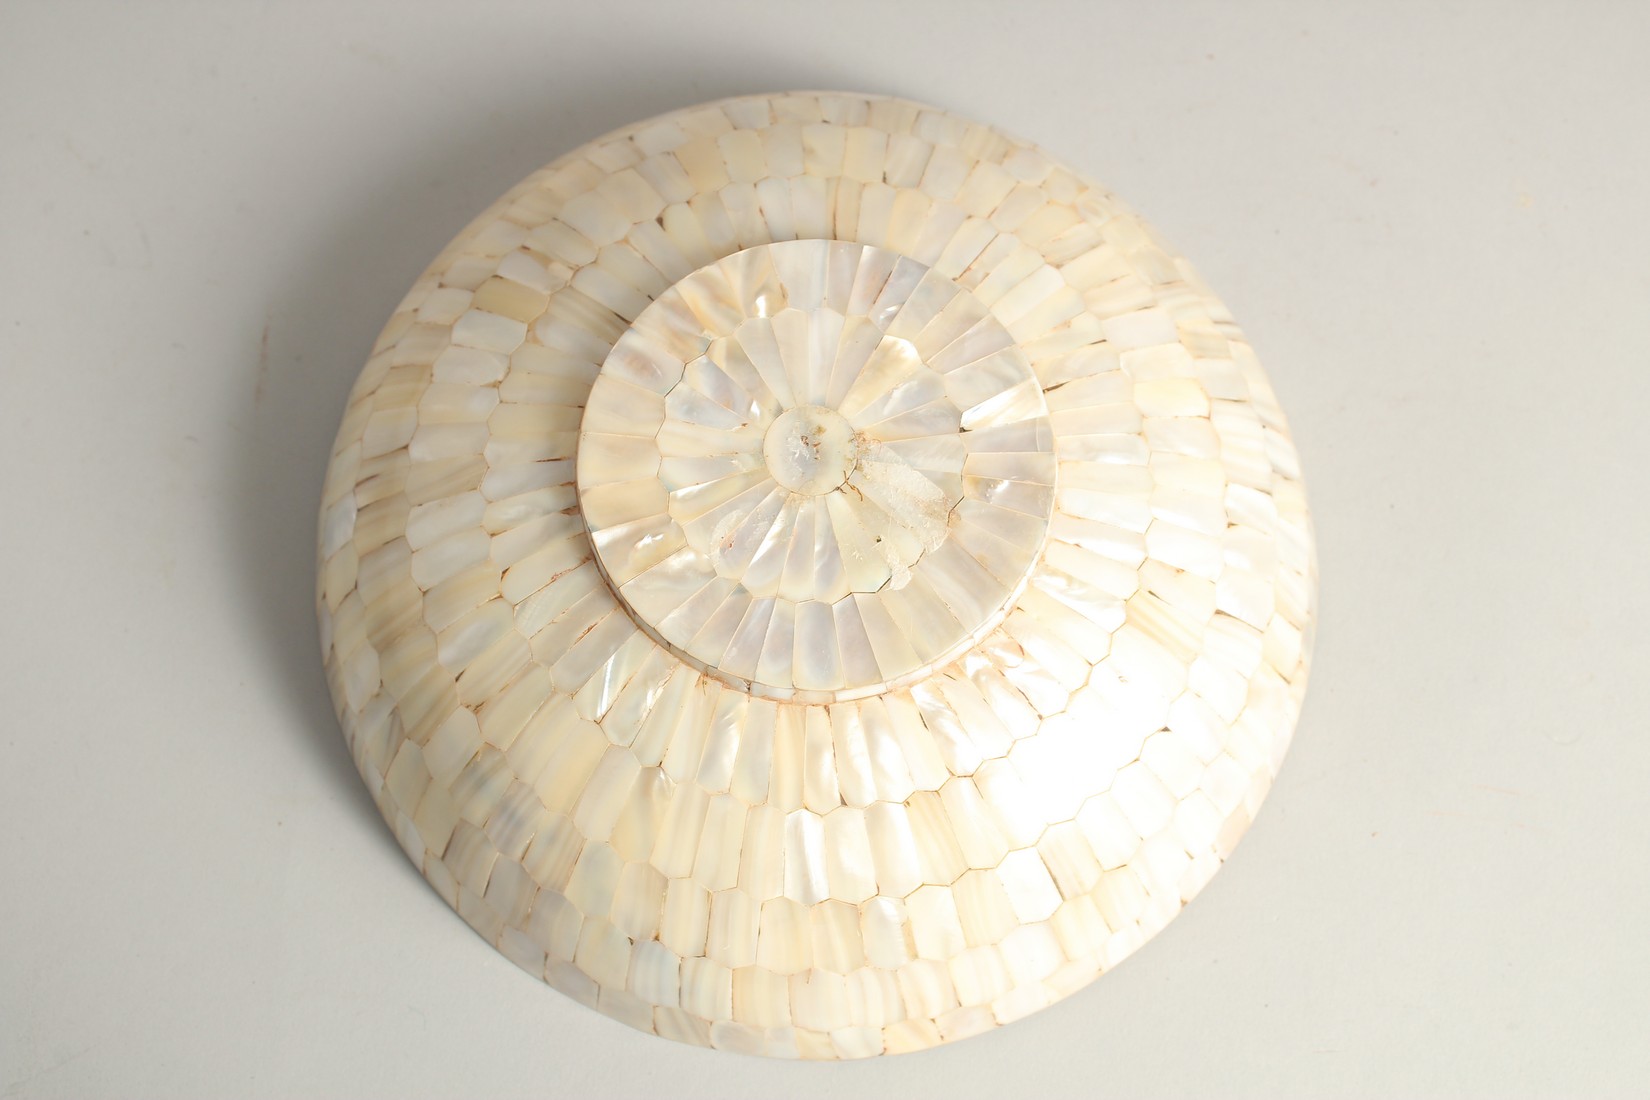 A LARGE MOTHER OF PEARL BOWL, 26cm diameter. - Image 3 of 3